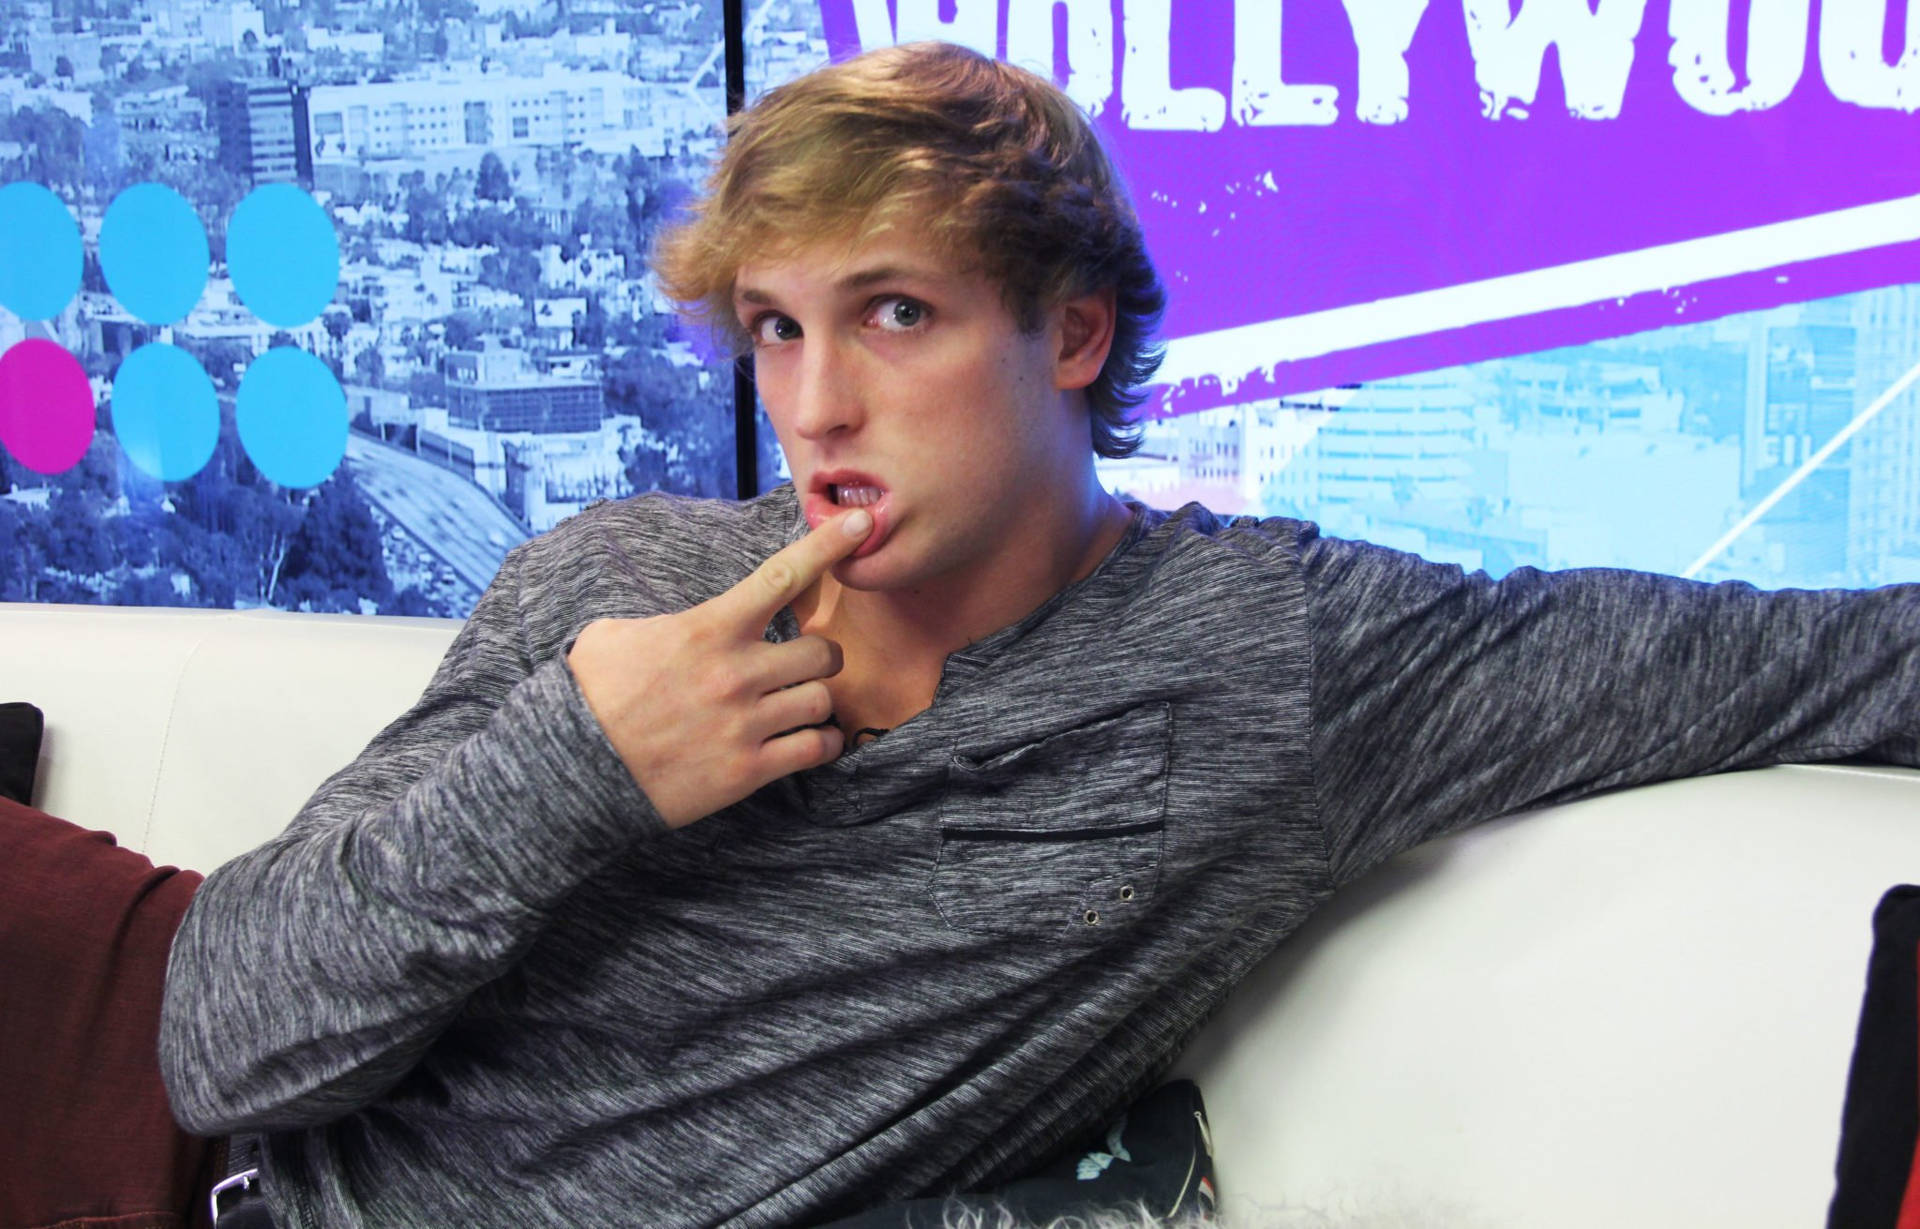 Logan Paul Being Witty And Playful